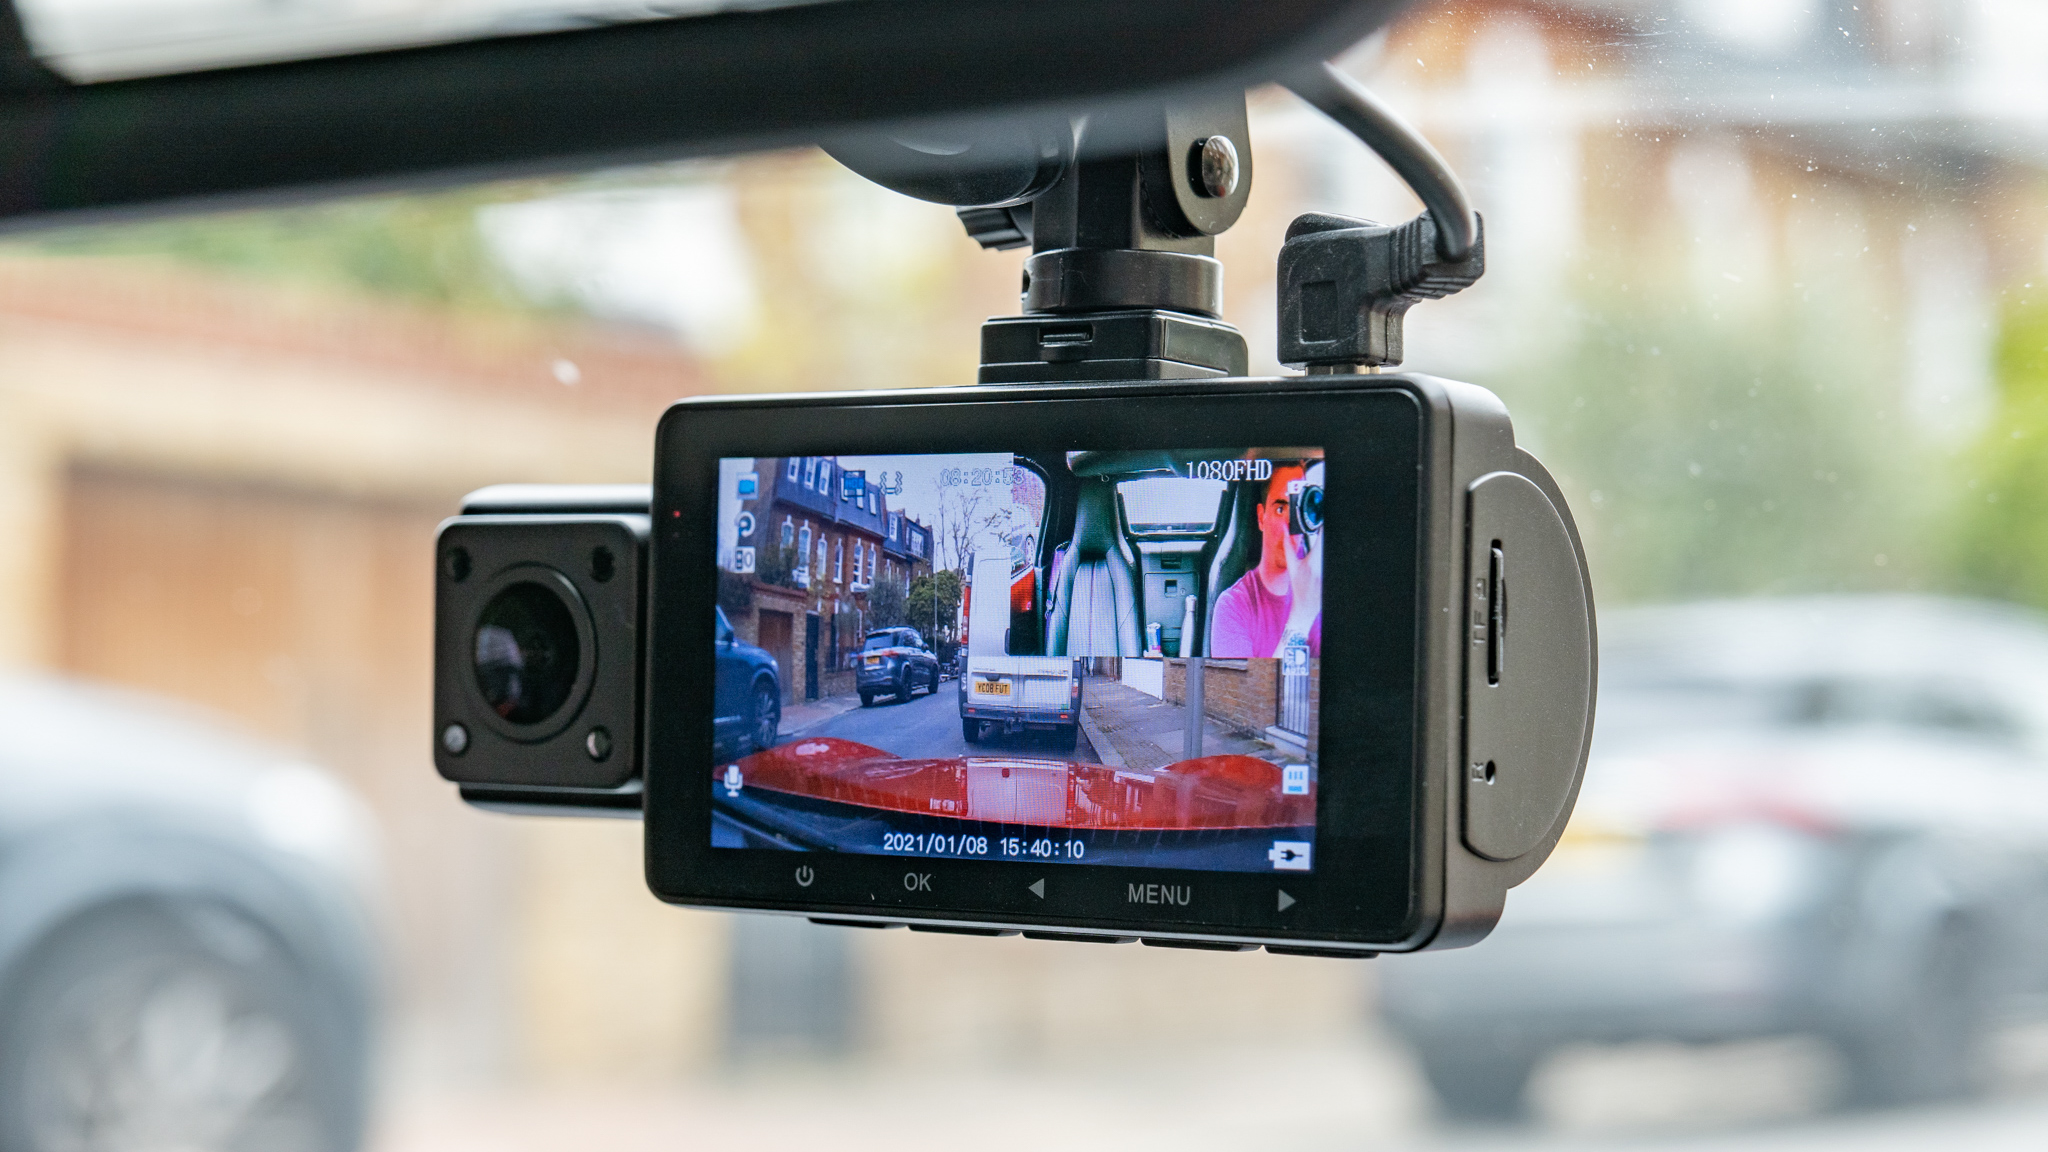 Orskey S960 three-channel dash cam review